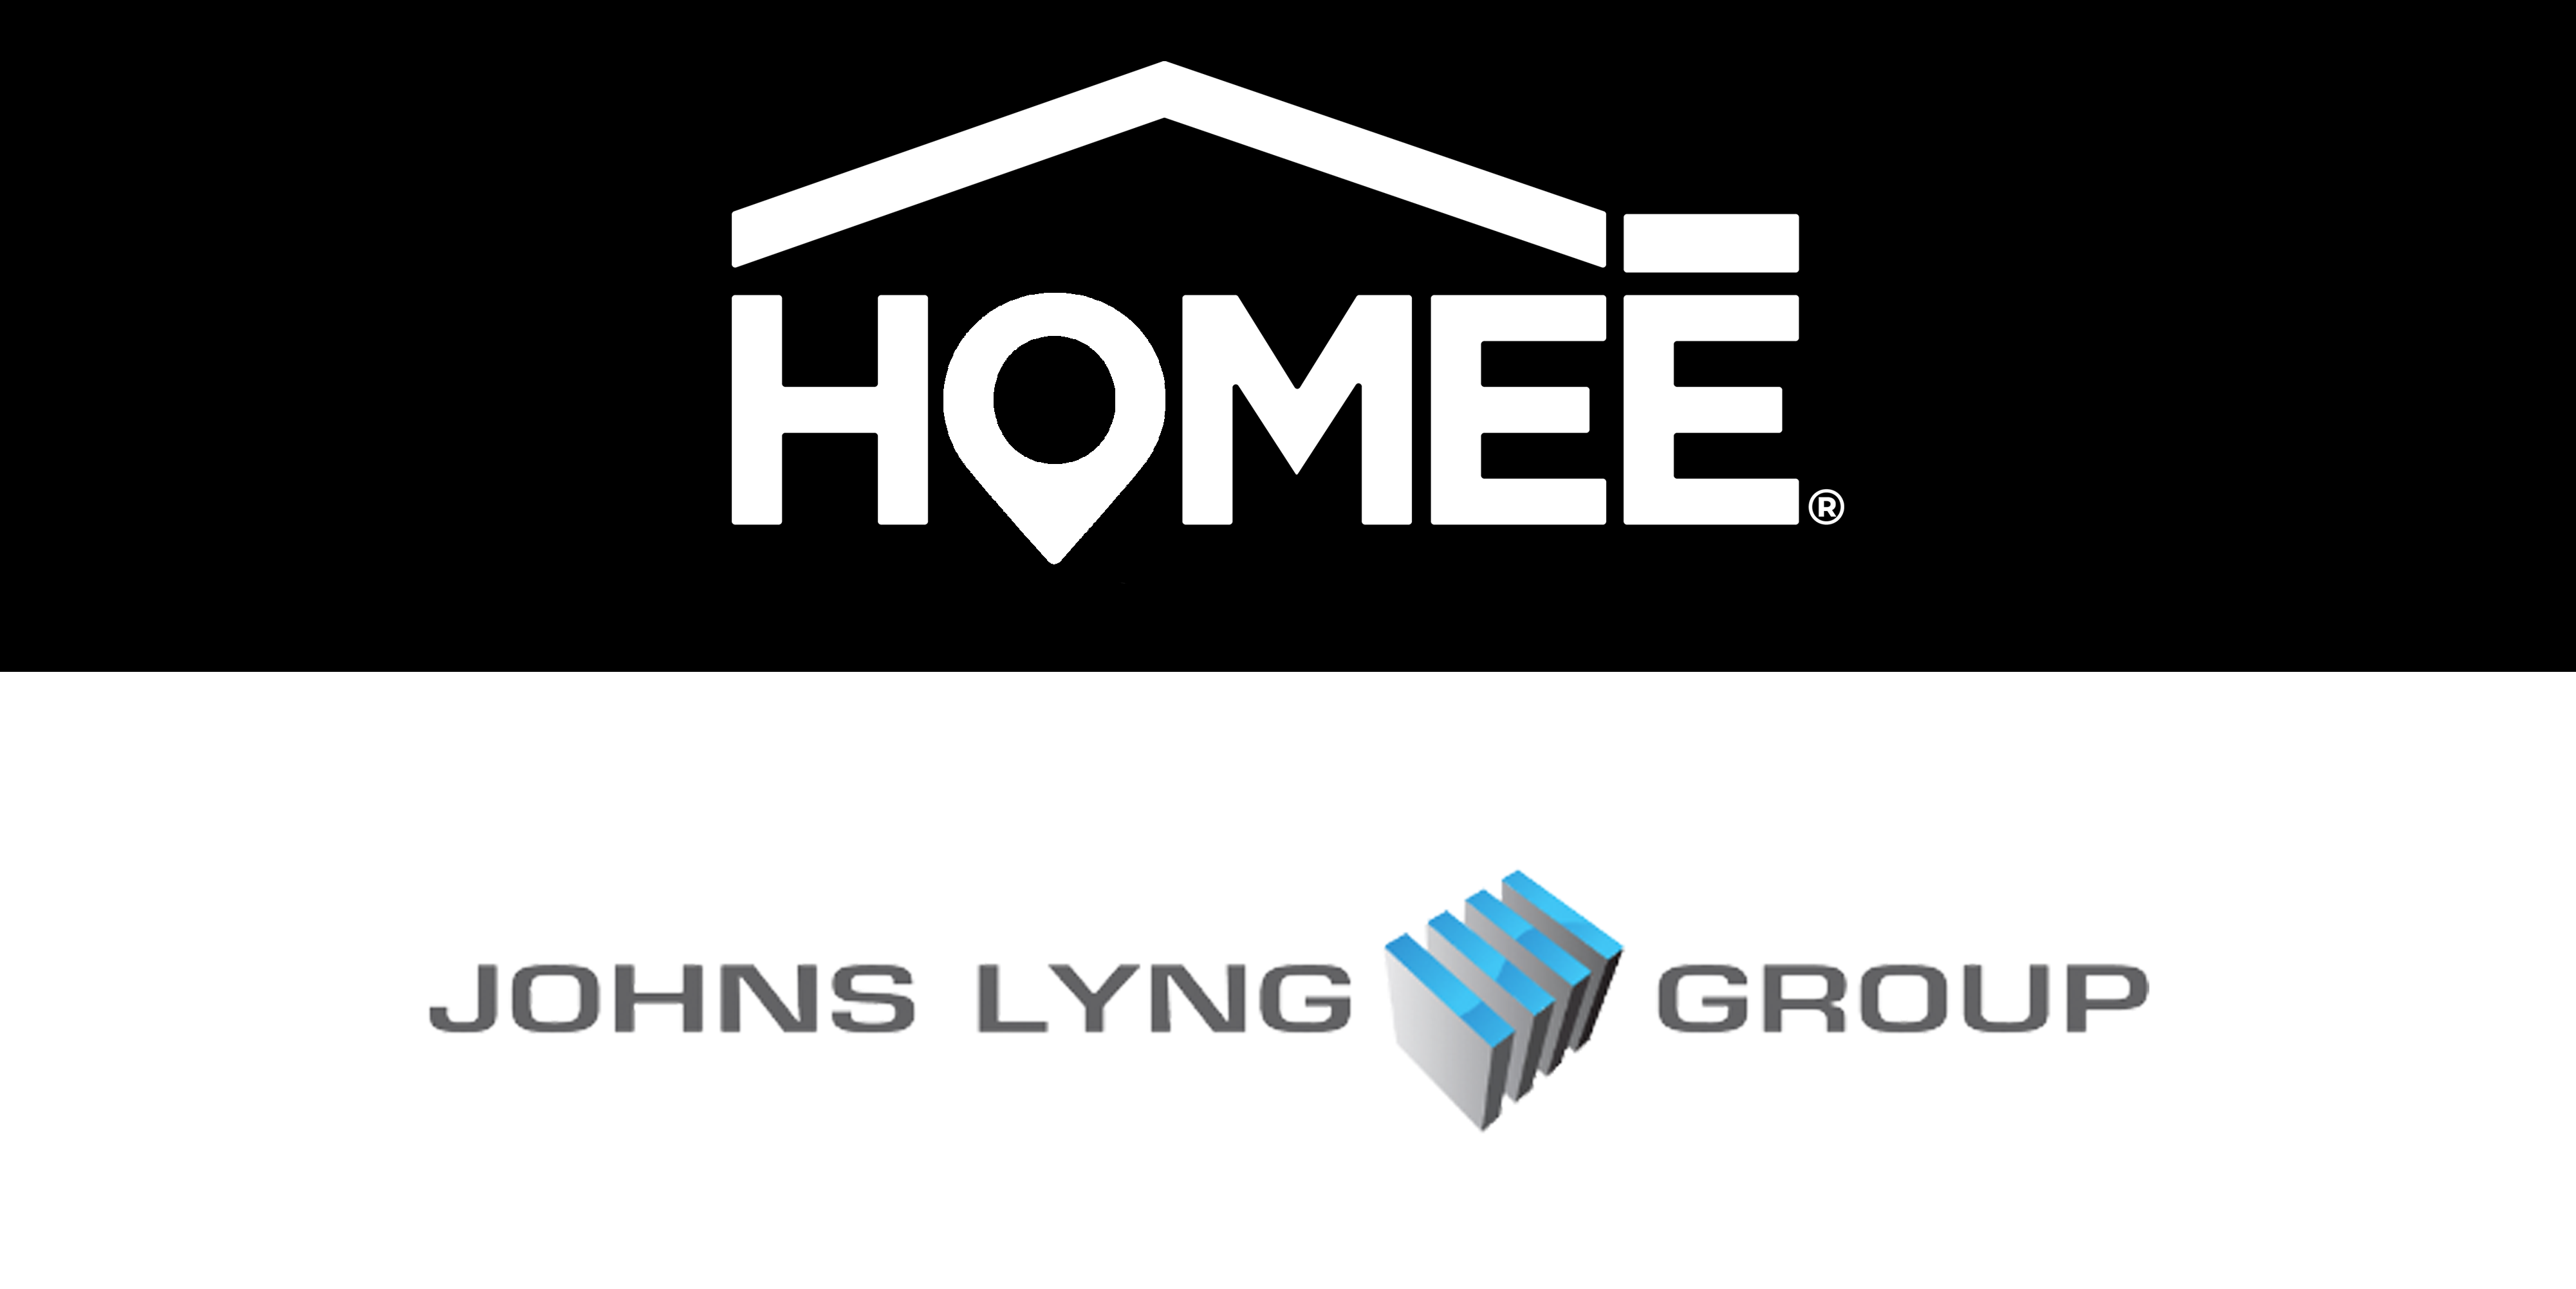 Johns Lyng Group USA Announces Partnership with HOMEE